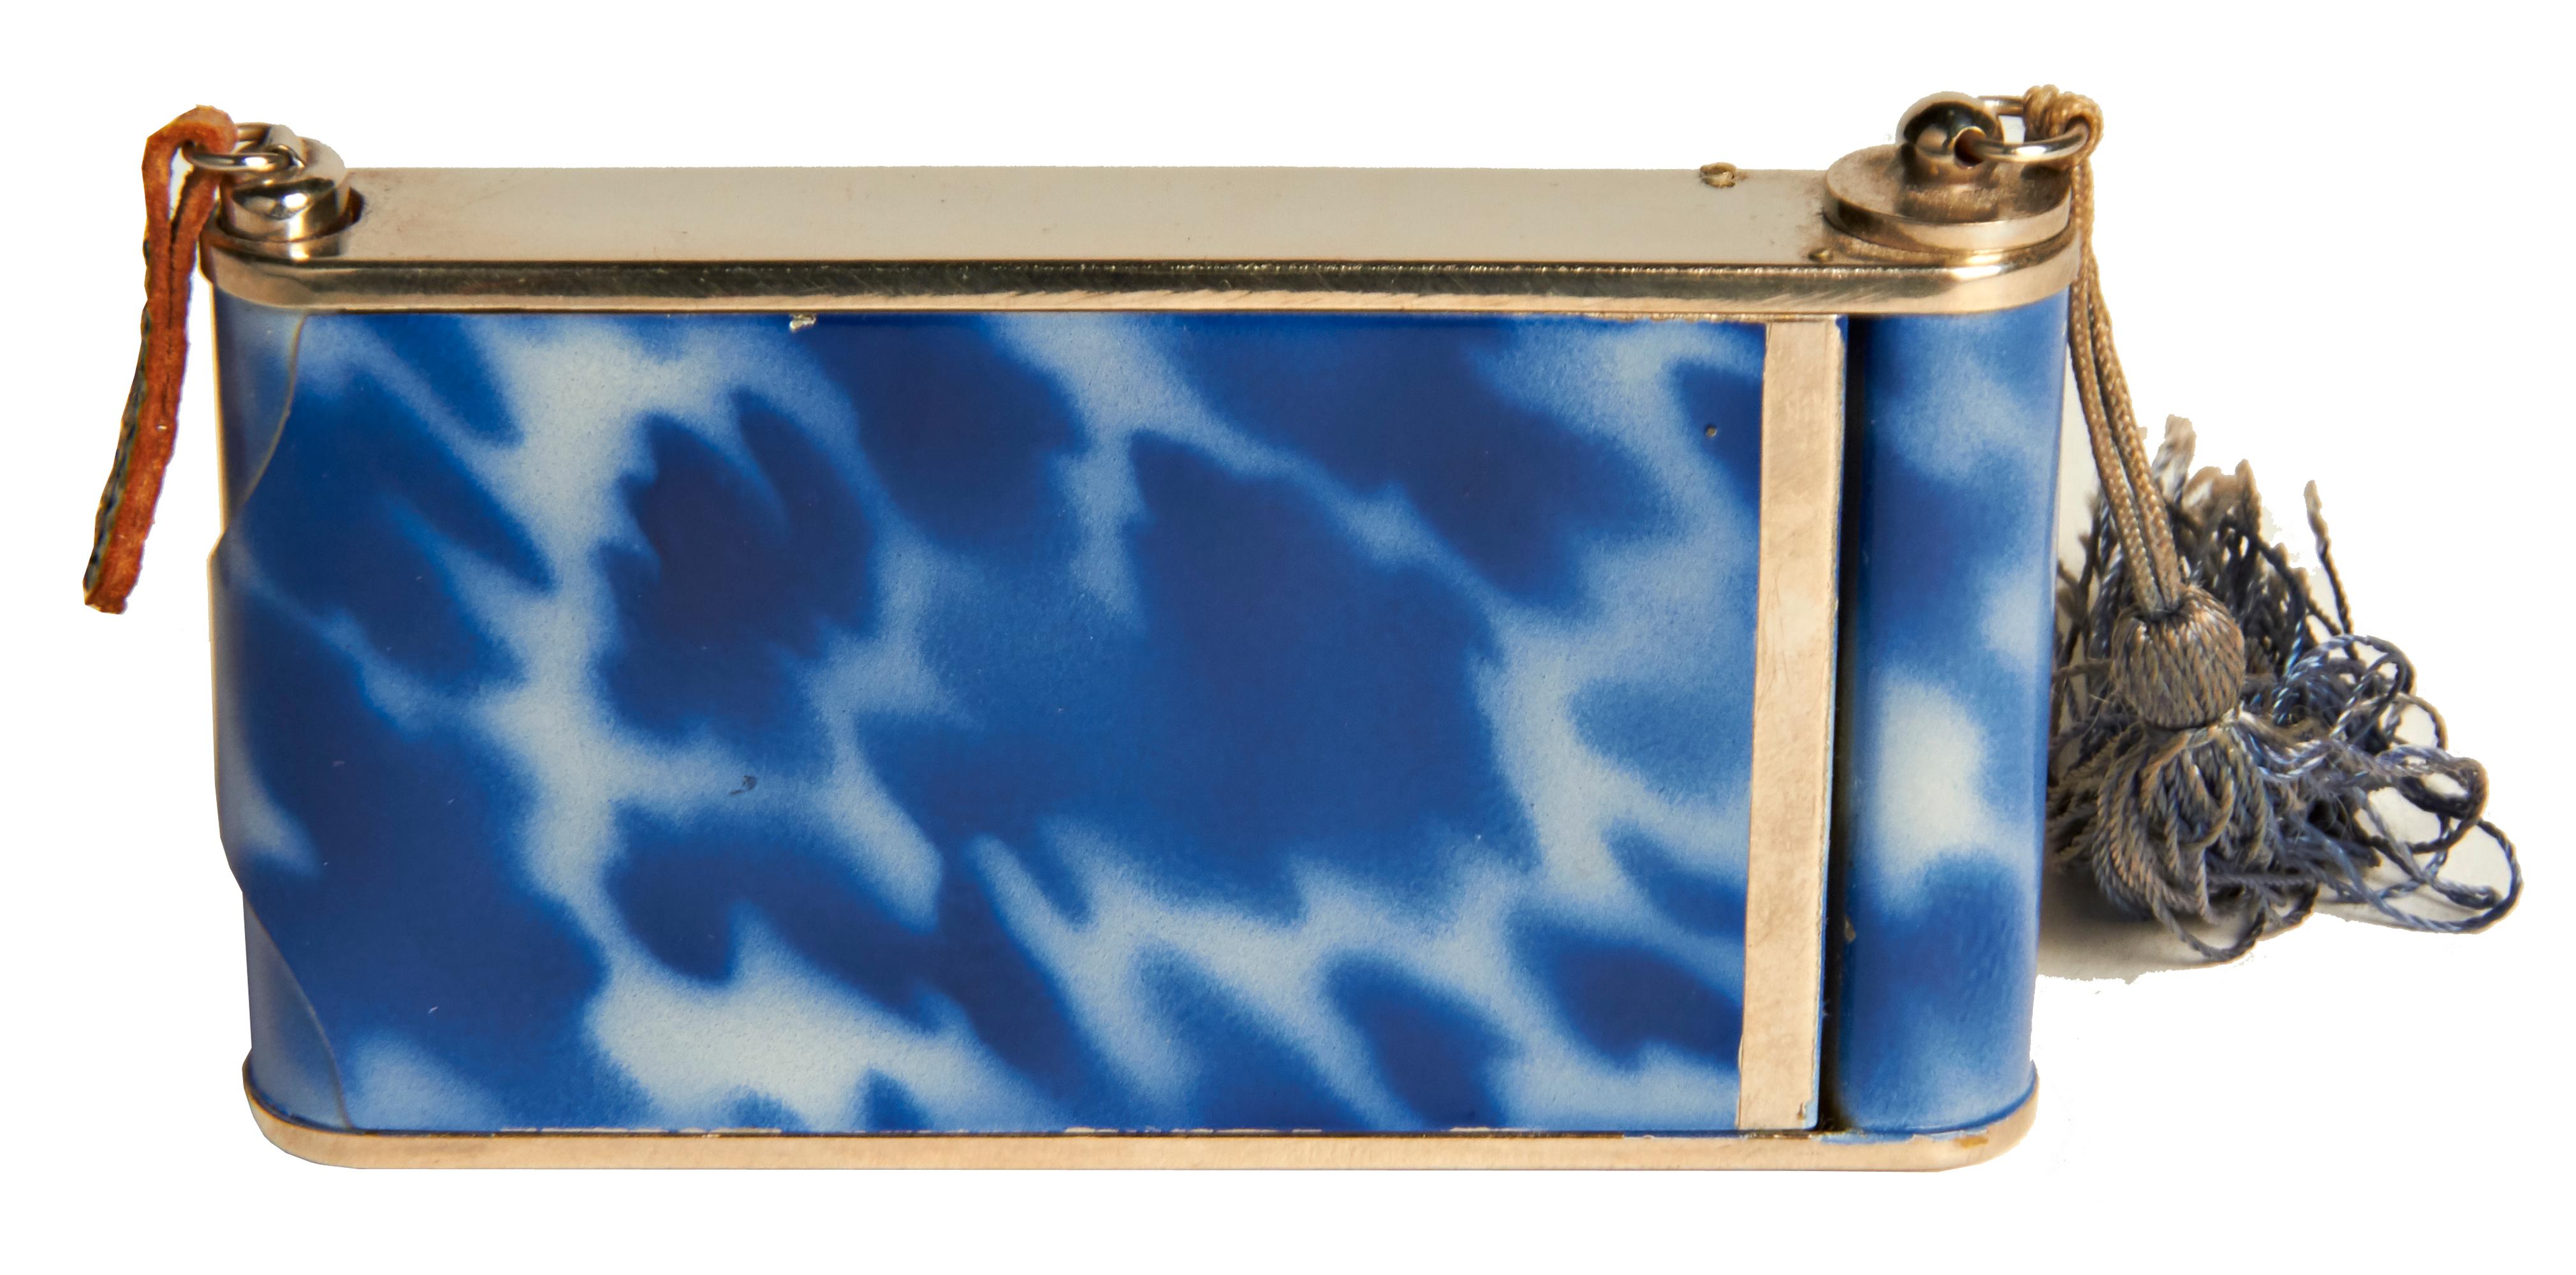 This beautifully designed German Art Deco camera compact/minaudiere features blue tortoiseshell enamel with a geometric design in ecru enamel and chrome. On one side it has a large lift-top compact with mirror in mint and unused condition and